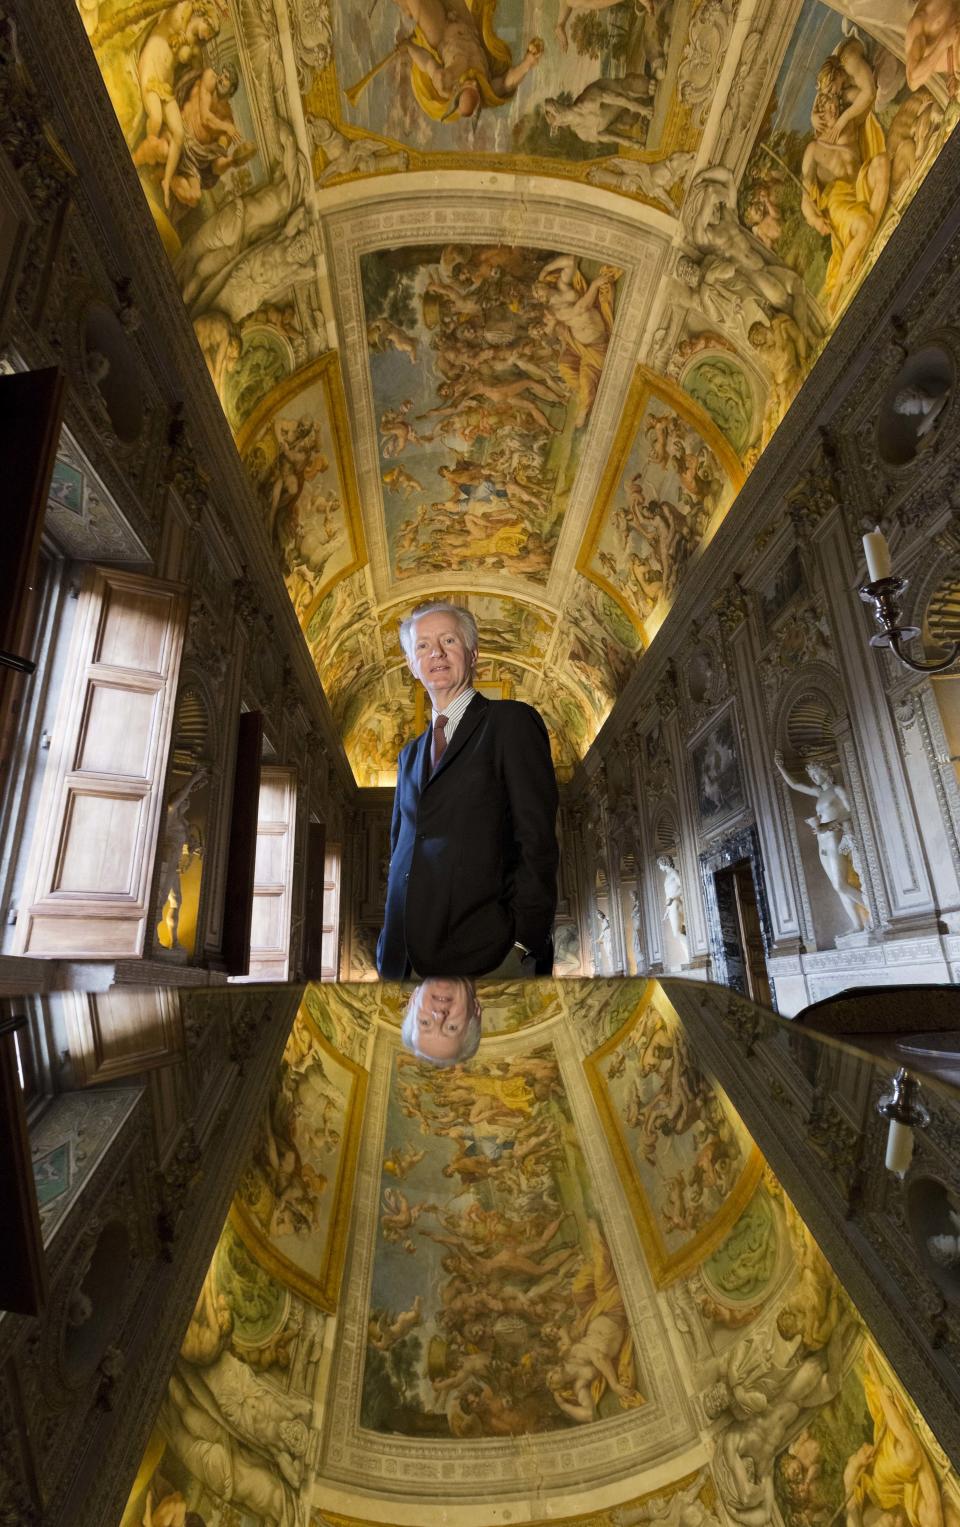 President of World Monuments Fund Europe, Bertrand du Vignaud poses in front of a mirror strategically positioned to allow visitors to admire the splendour of the frescoed ceilings of the Carracci Gallery in the Farnese Palace that hosts the French Embassy in Rome, Wednesday, Feb. 26, 2014. The World Monuments Fund Europe will allocate some 800 million Euros for the restoration of the about 140 square meters of 16th century frescoes by Annibale and Agostino Carracci that will begin mid March and expected to be completed in 2015. (AP Photo/Domenico Stinellis)